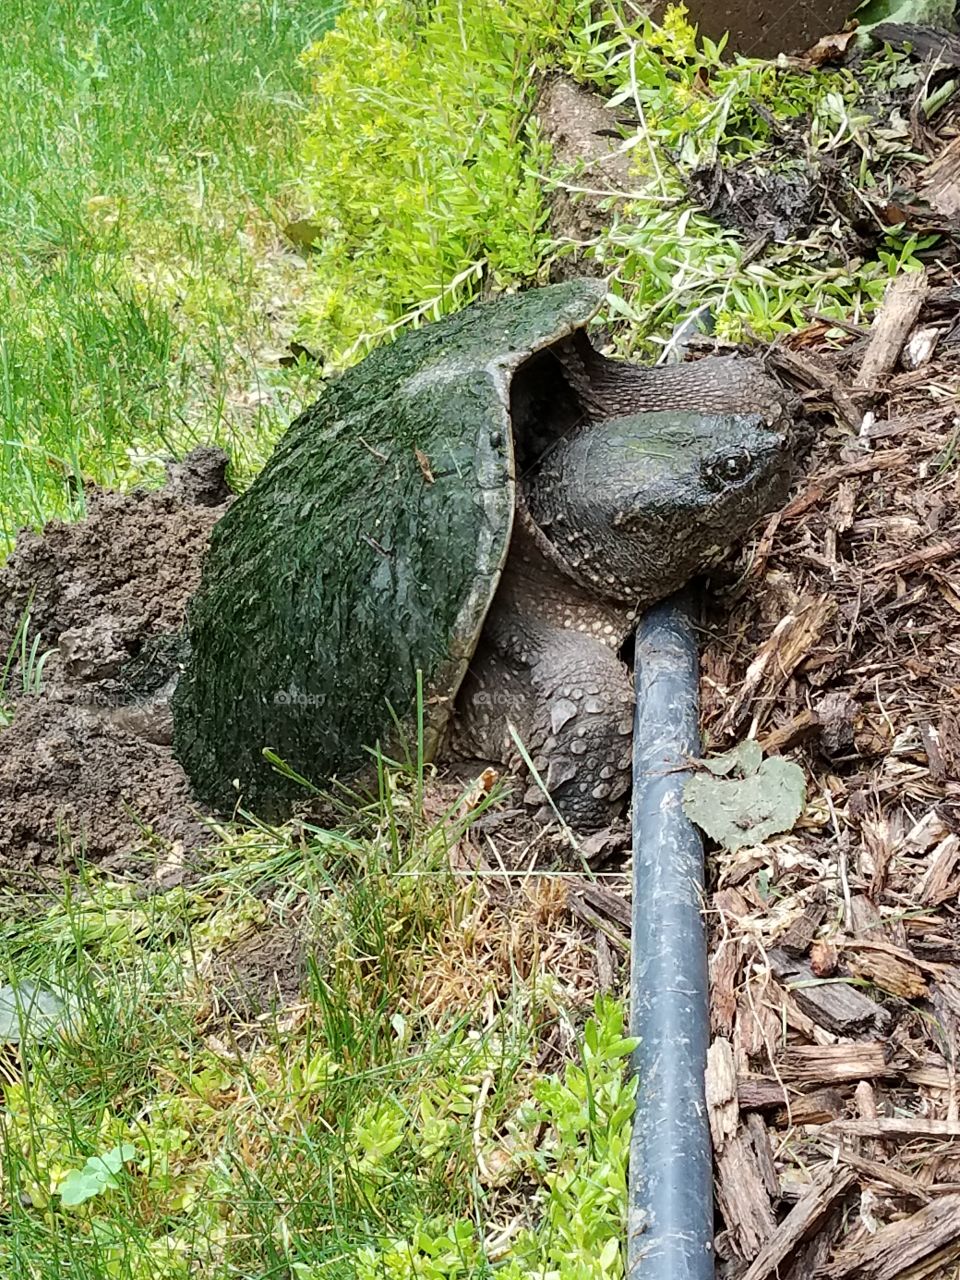 snapper laying eggs